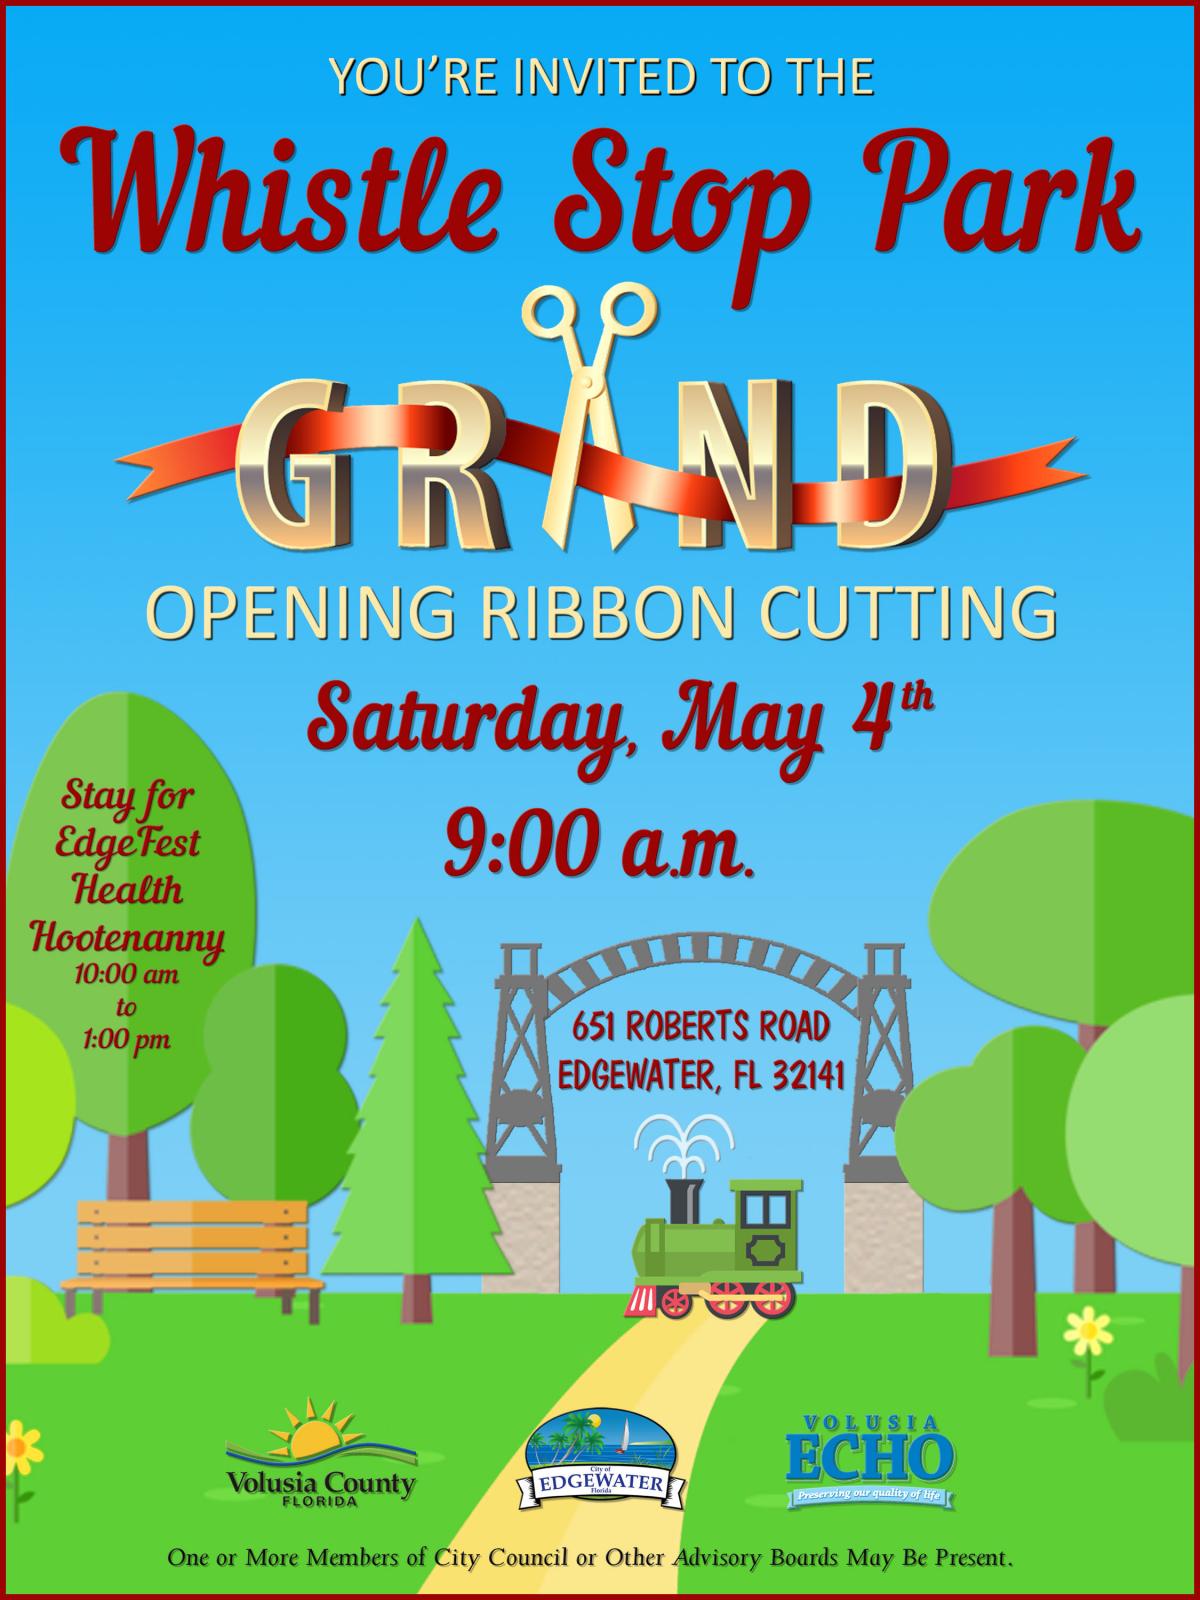 Whistle Stop Park Grand Opening Celebration, May 4th Starting at 9:00 a.m.  Stay for EdgeFest Health Hootenanny 10 am to 1 pm.